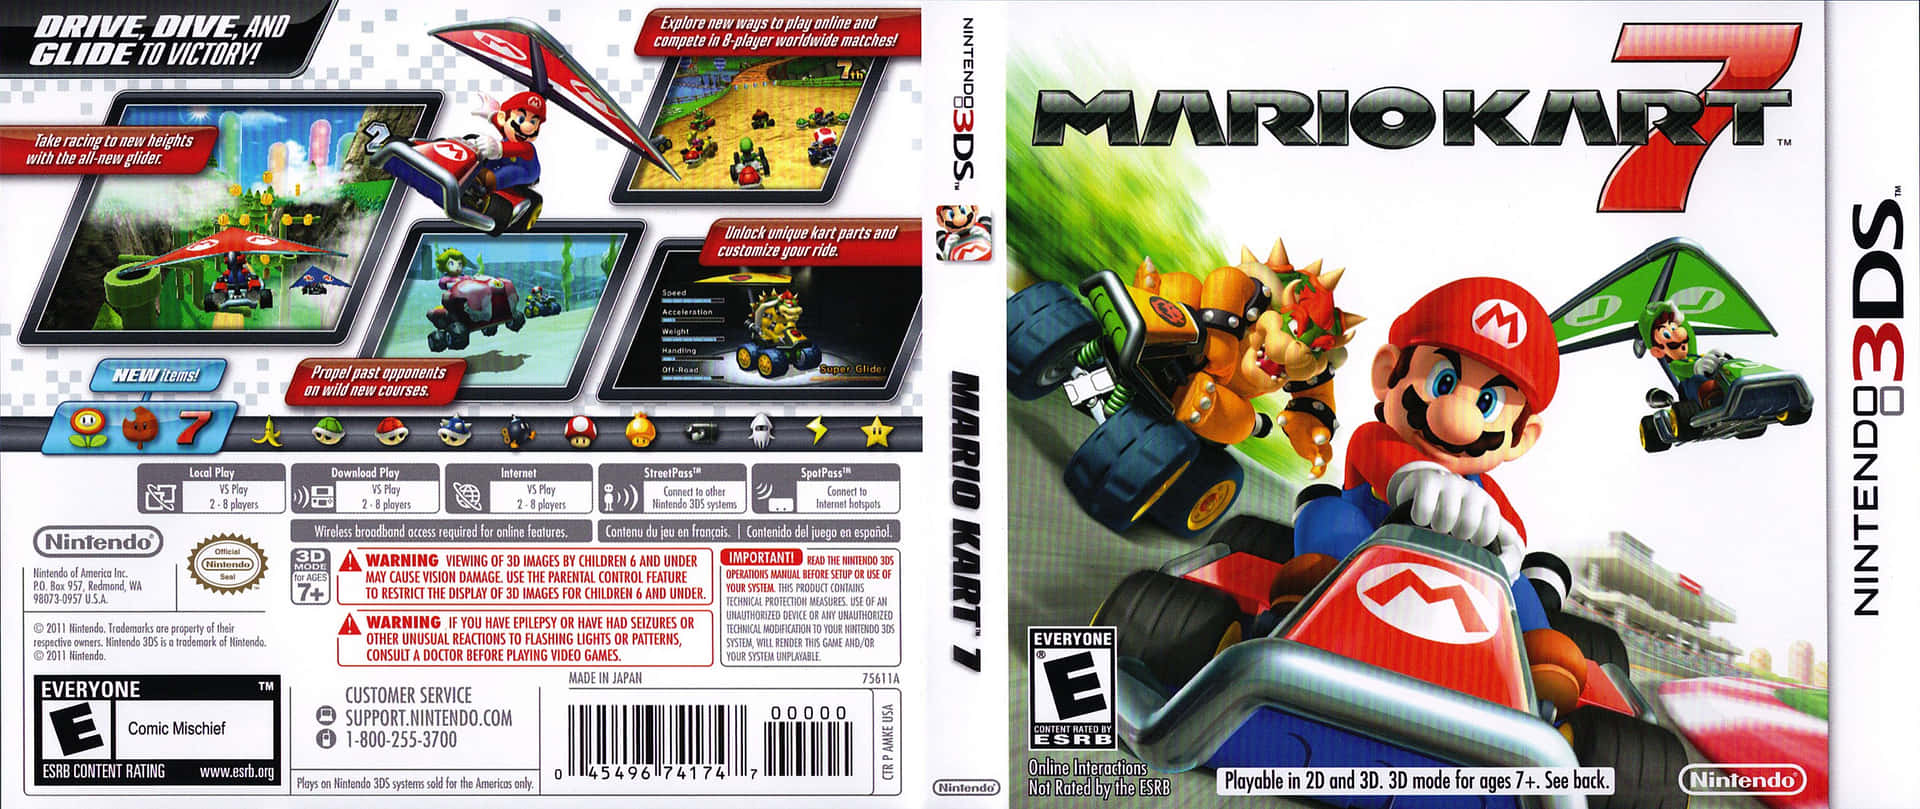 You'll need all the practice you can get before racing in Mario Kart.